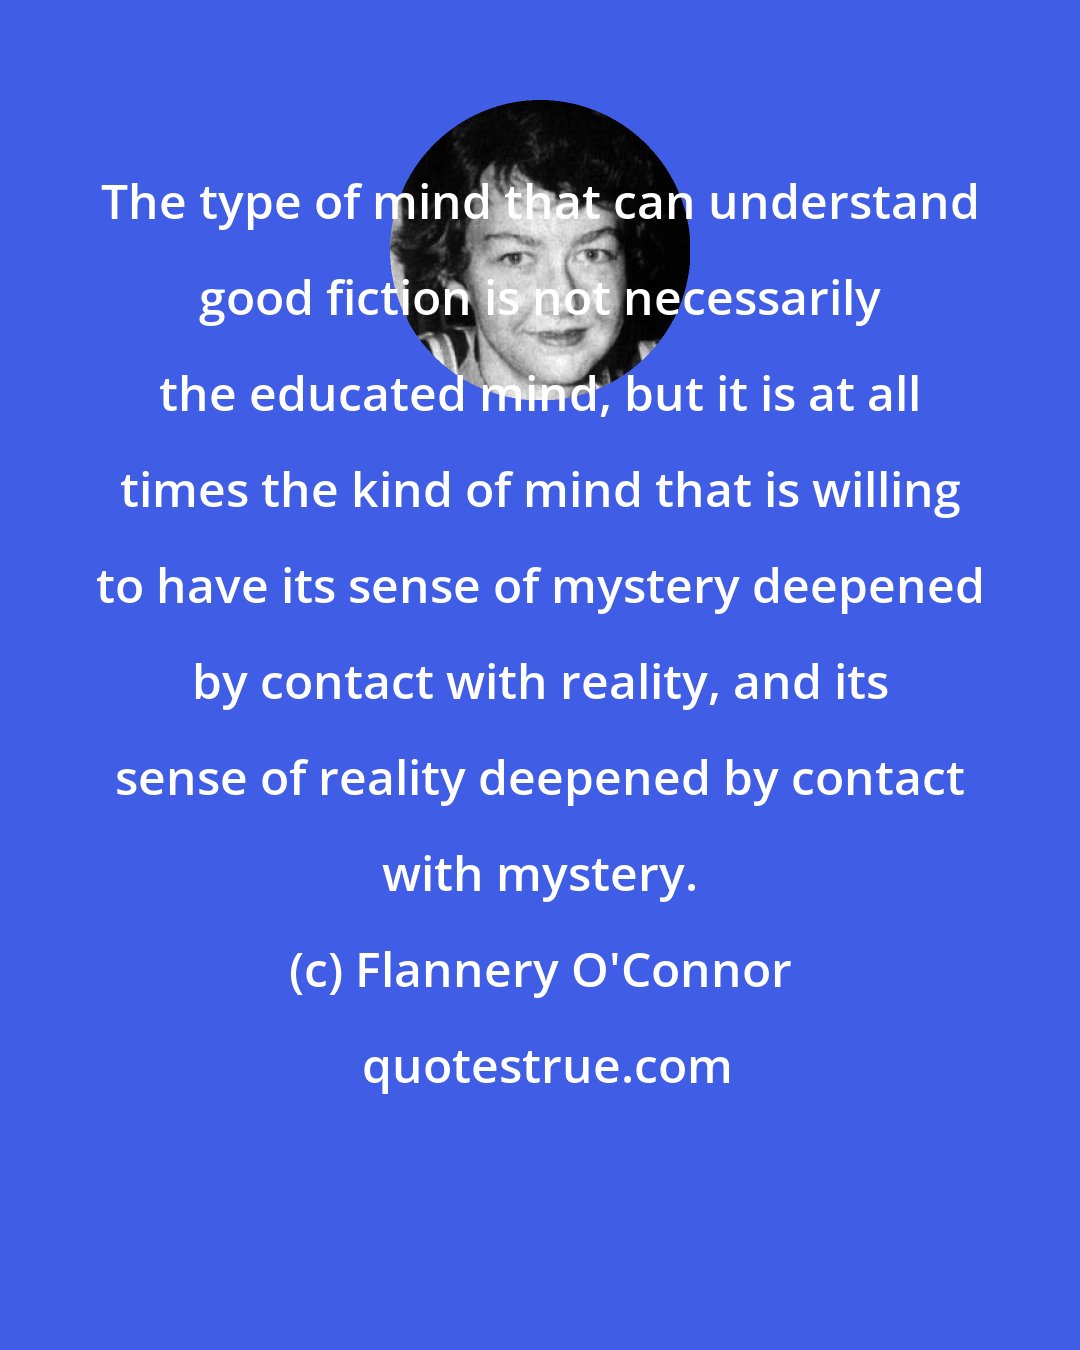 Flannery O'Connor: The type of mind that can understand good fiction is not necessarily the educated mind, but it is at all times the kind of mind that is willing to have its sense of mystery deepened by contact with reality, and its sense of reality deepened by contact with mystery.